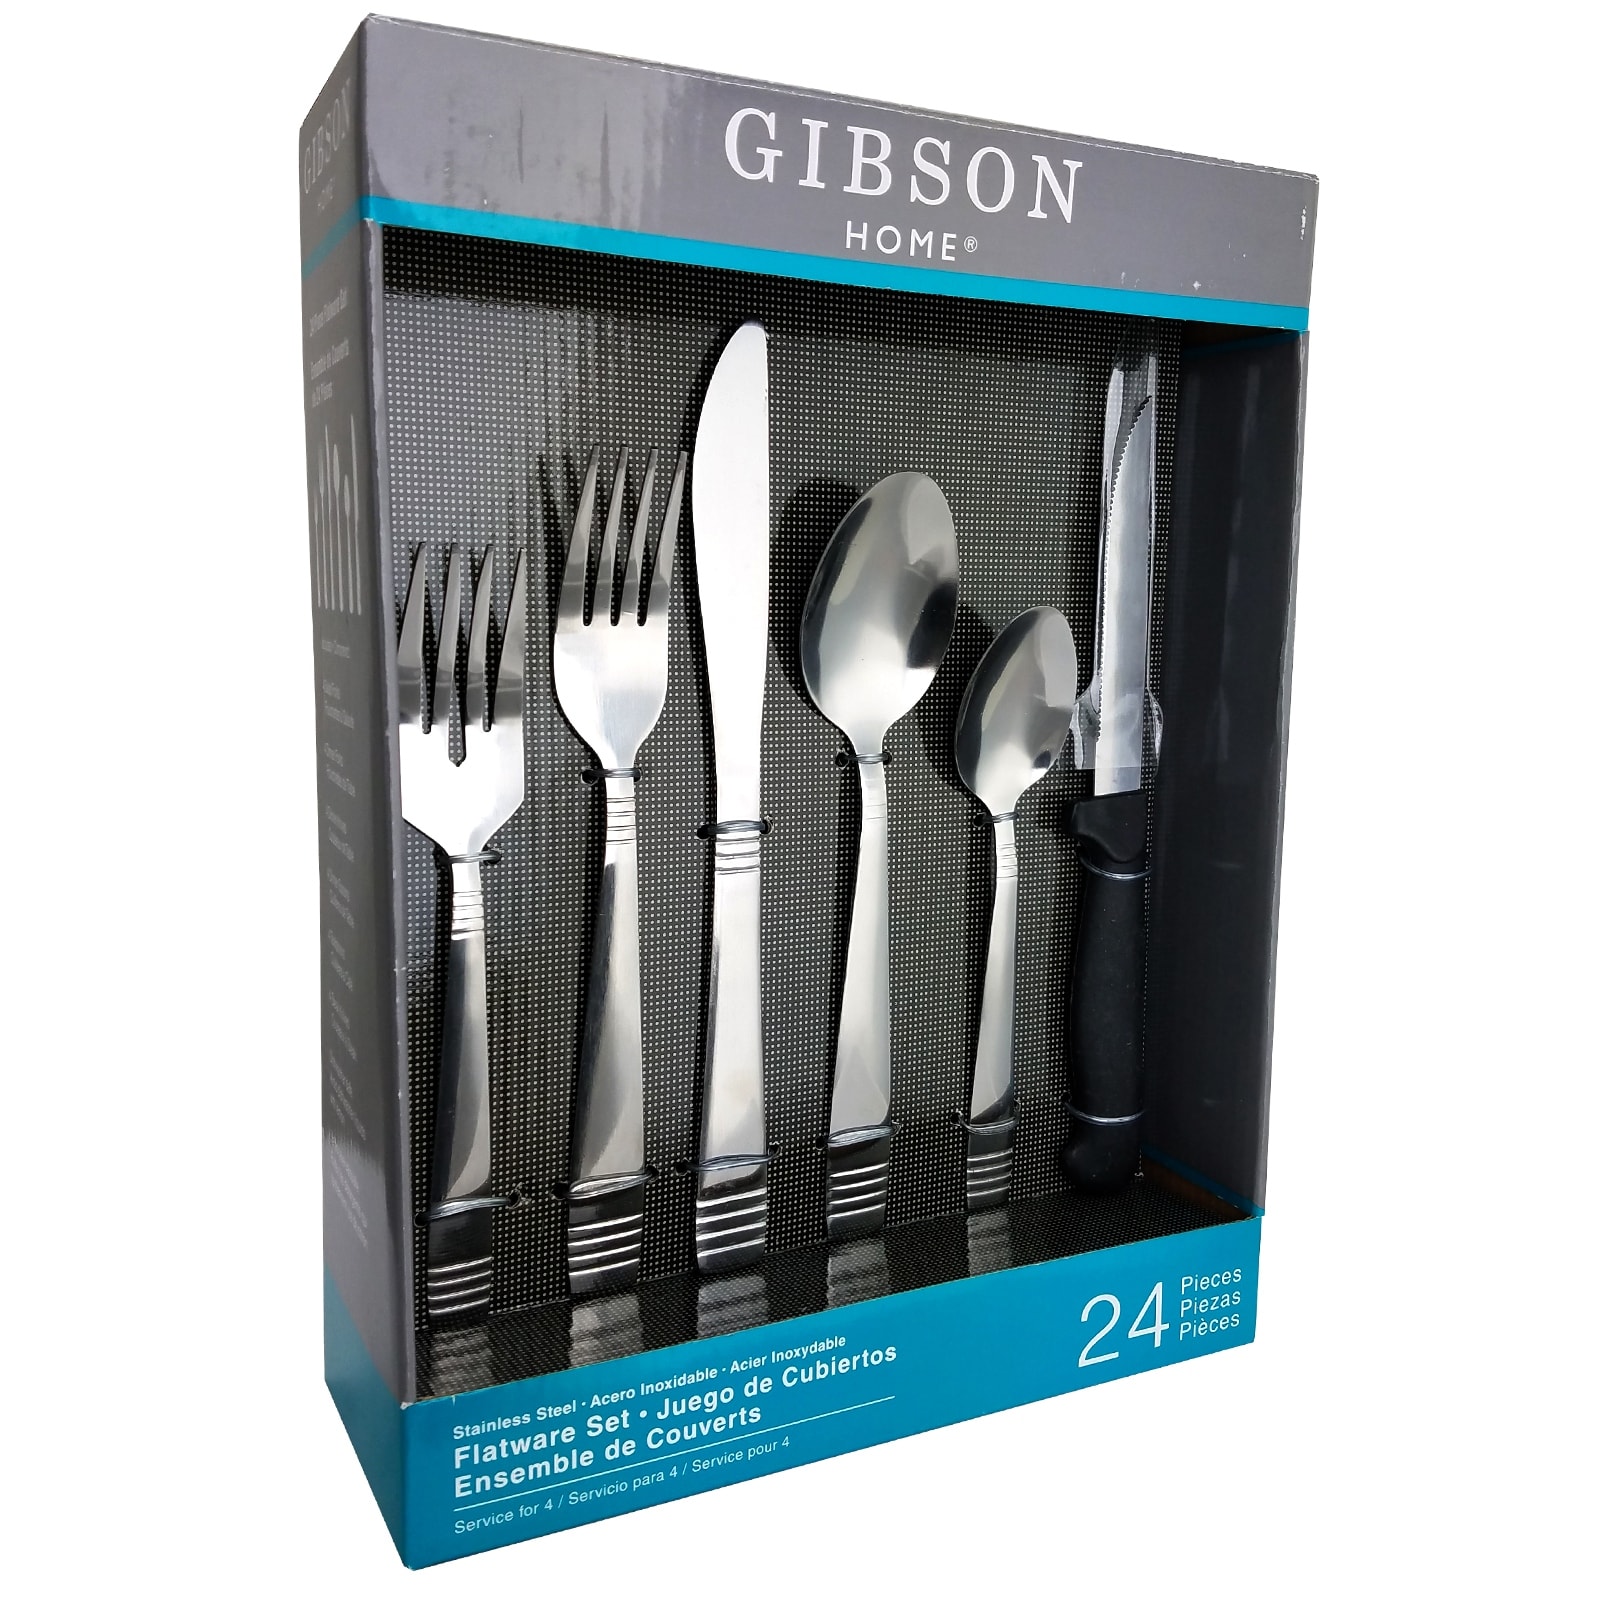 https://ak1.ostkcdn.com/images/products/is/images/direct/bda80ee593dfe7223906f3fd1768e53dac459a49/Gibson-Palmore-Plus-24-Piece-Stainless-Steel-Flatware-Set-with-4-Steak-Knives.jpg